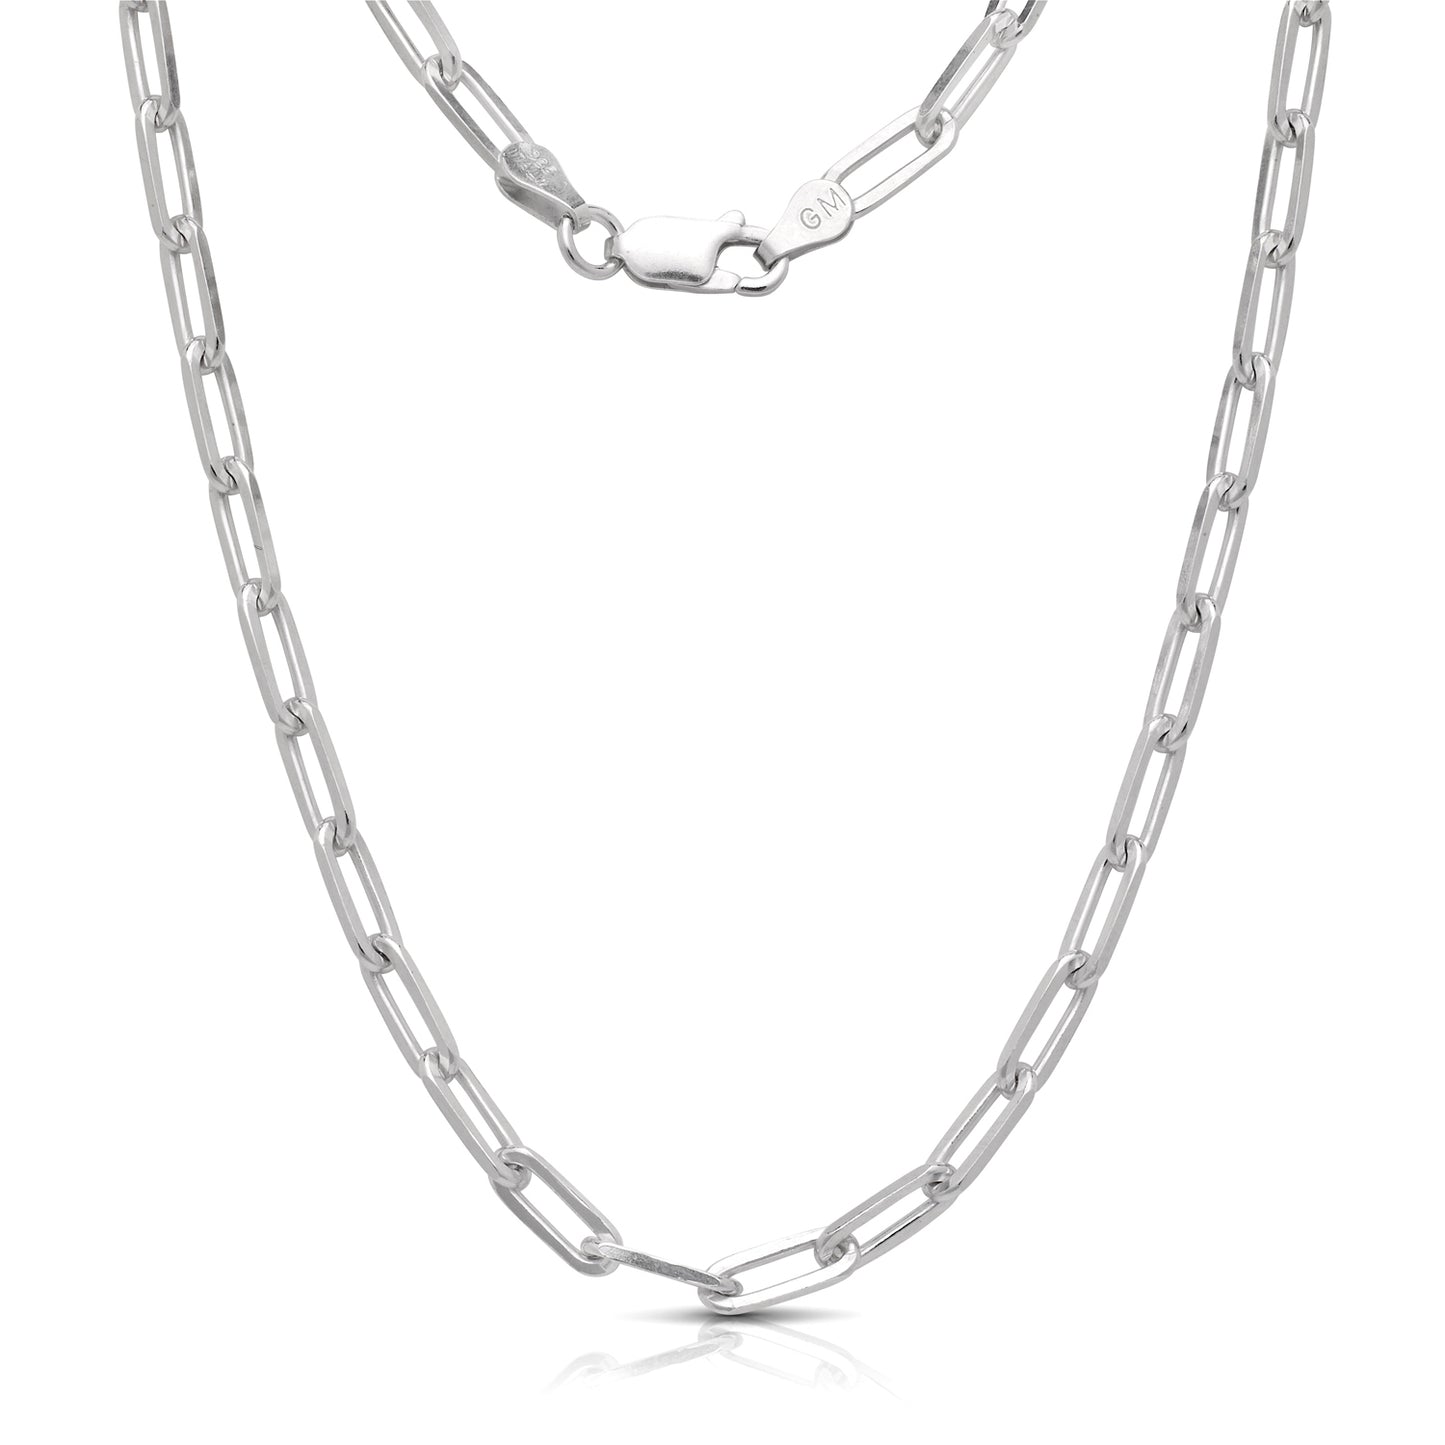 Better Jewelry New! Trendy Link Chain Necklace .925 Sterling Silver